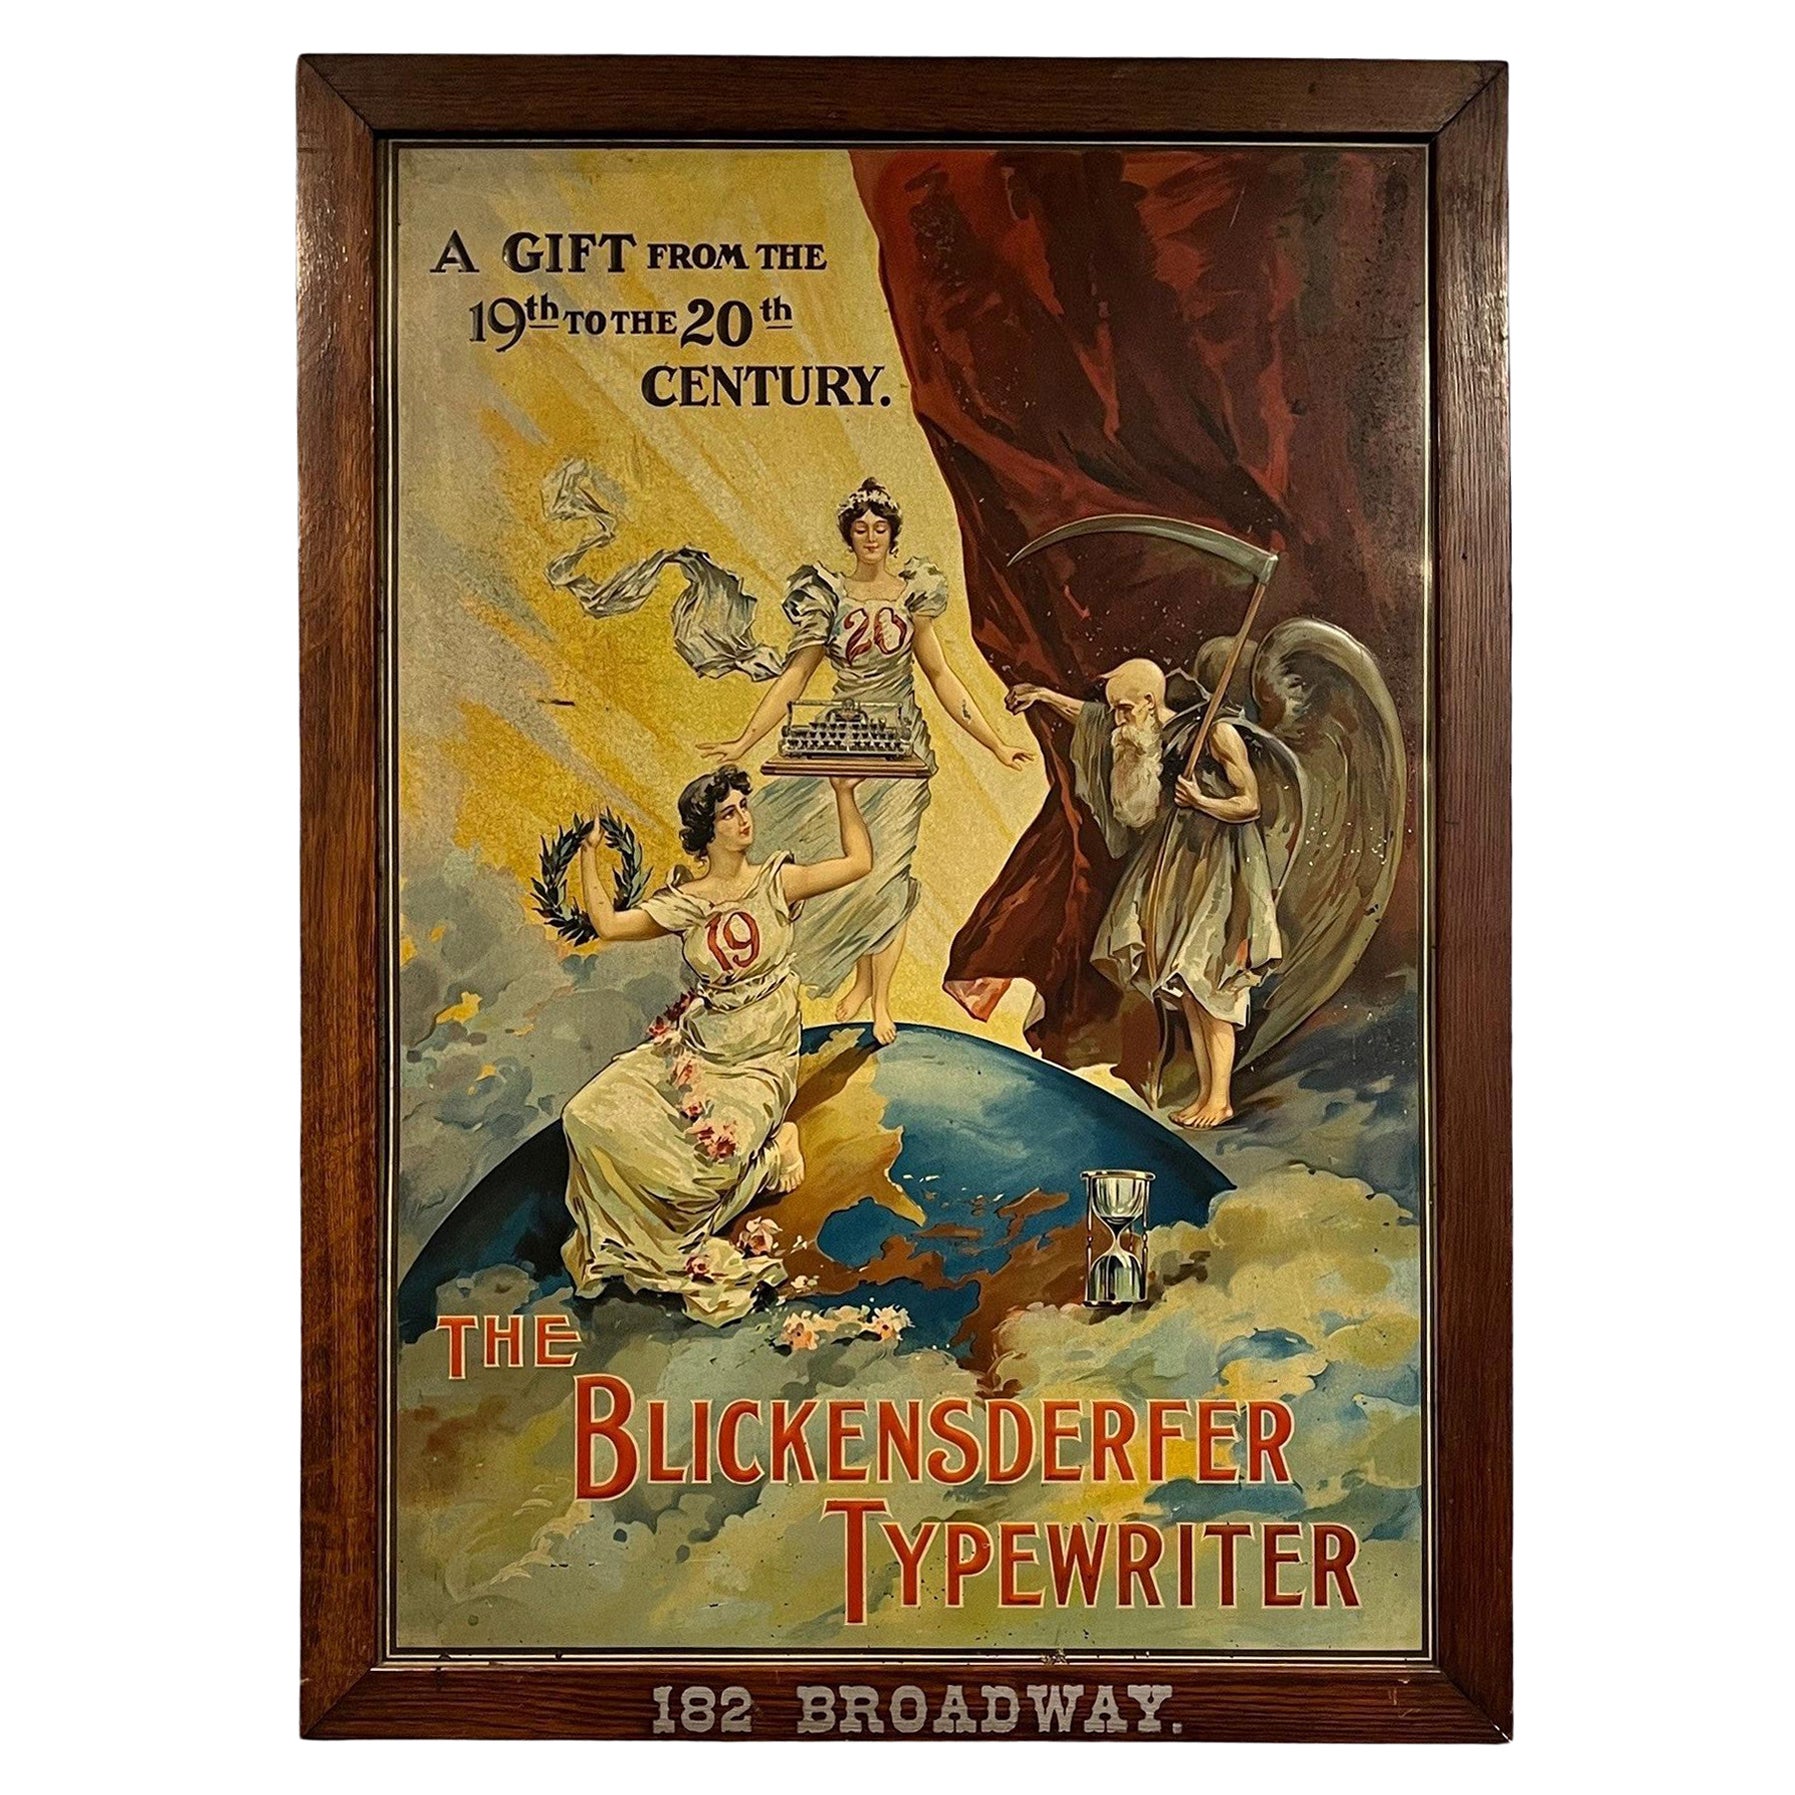 Blickensderfer Typewriter Tin Sign "A Gift from the 19th to the 20th Century" For Sale